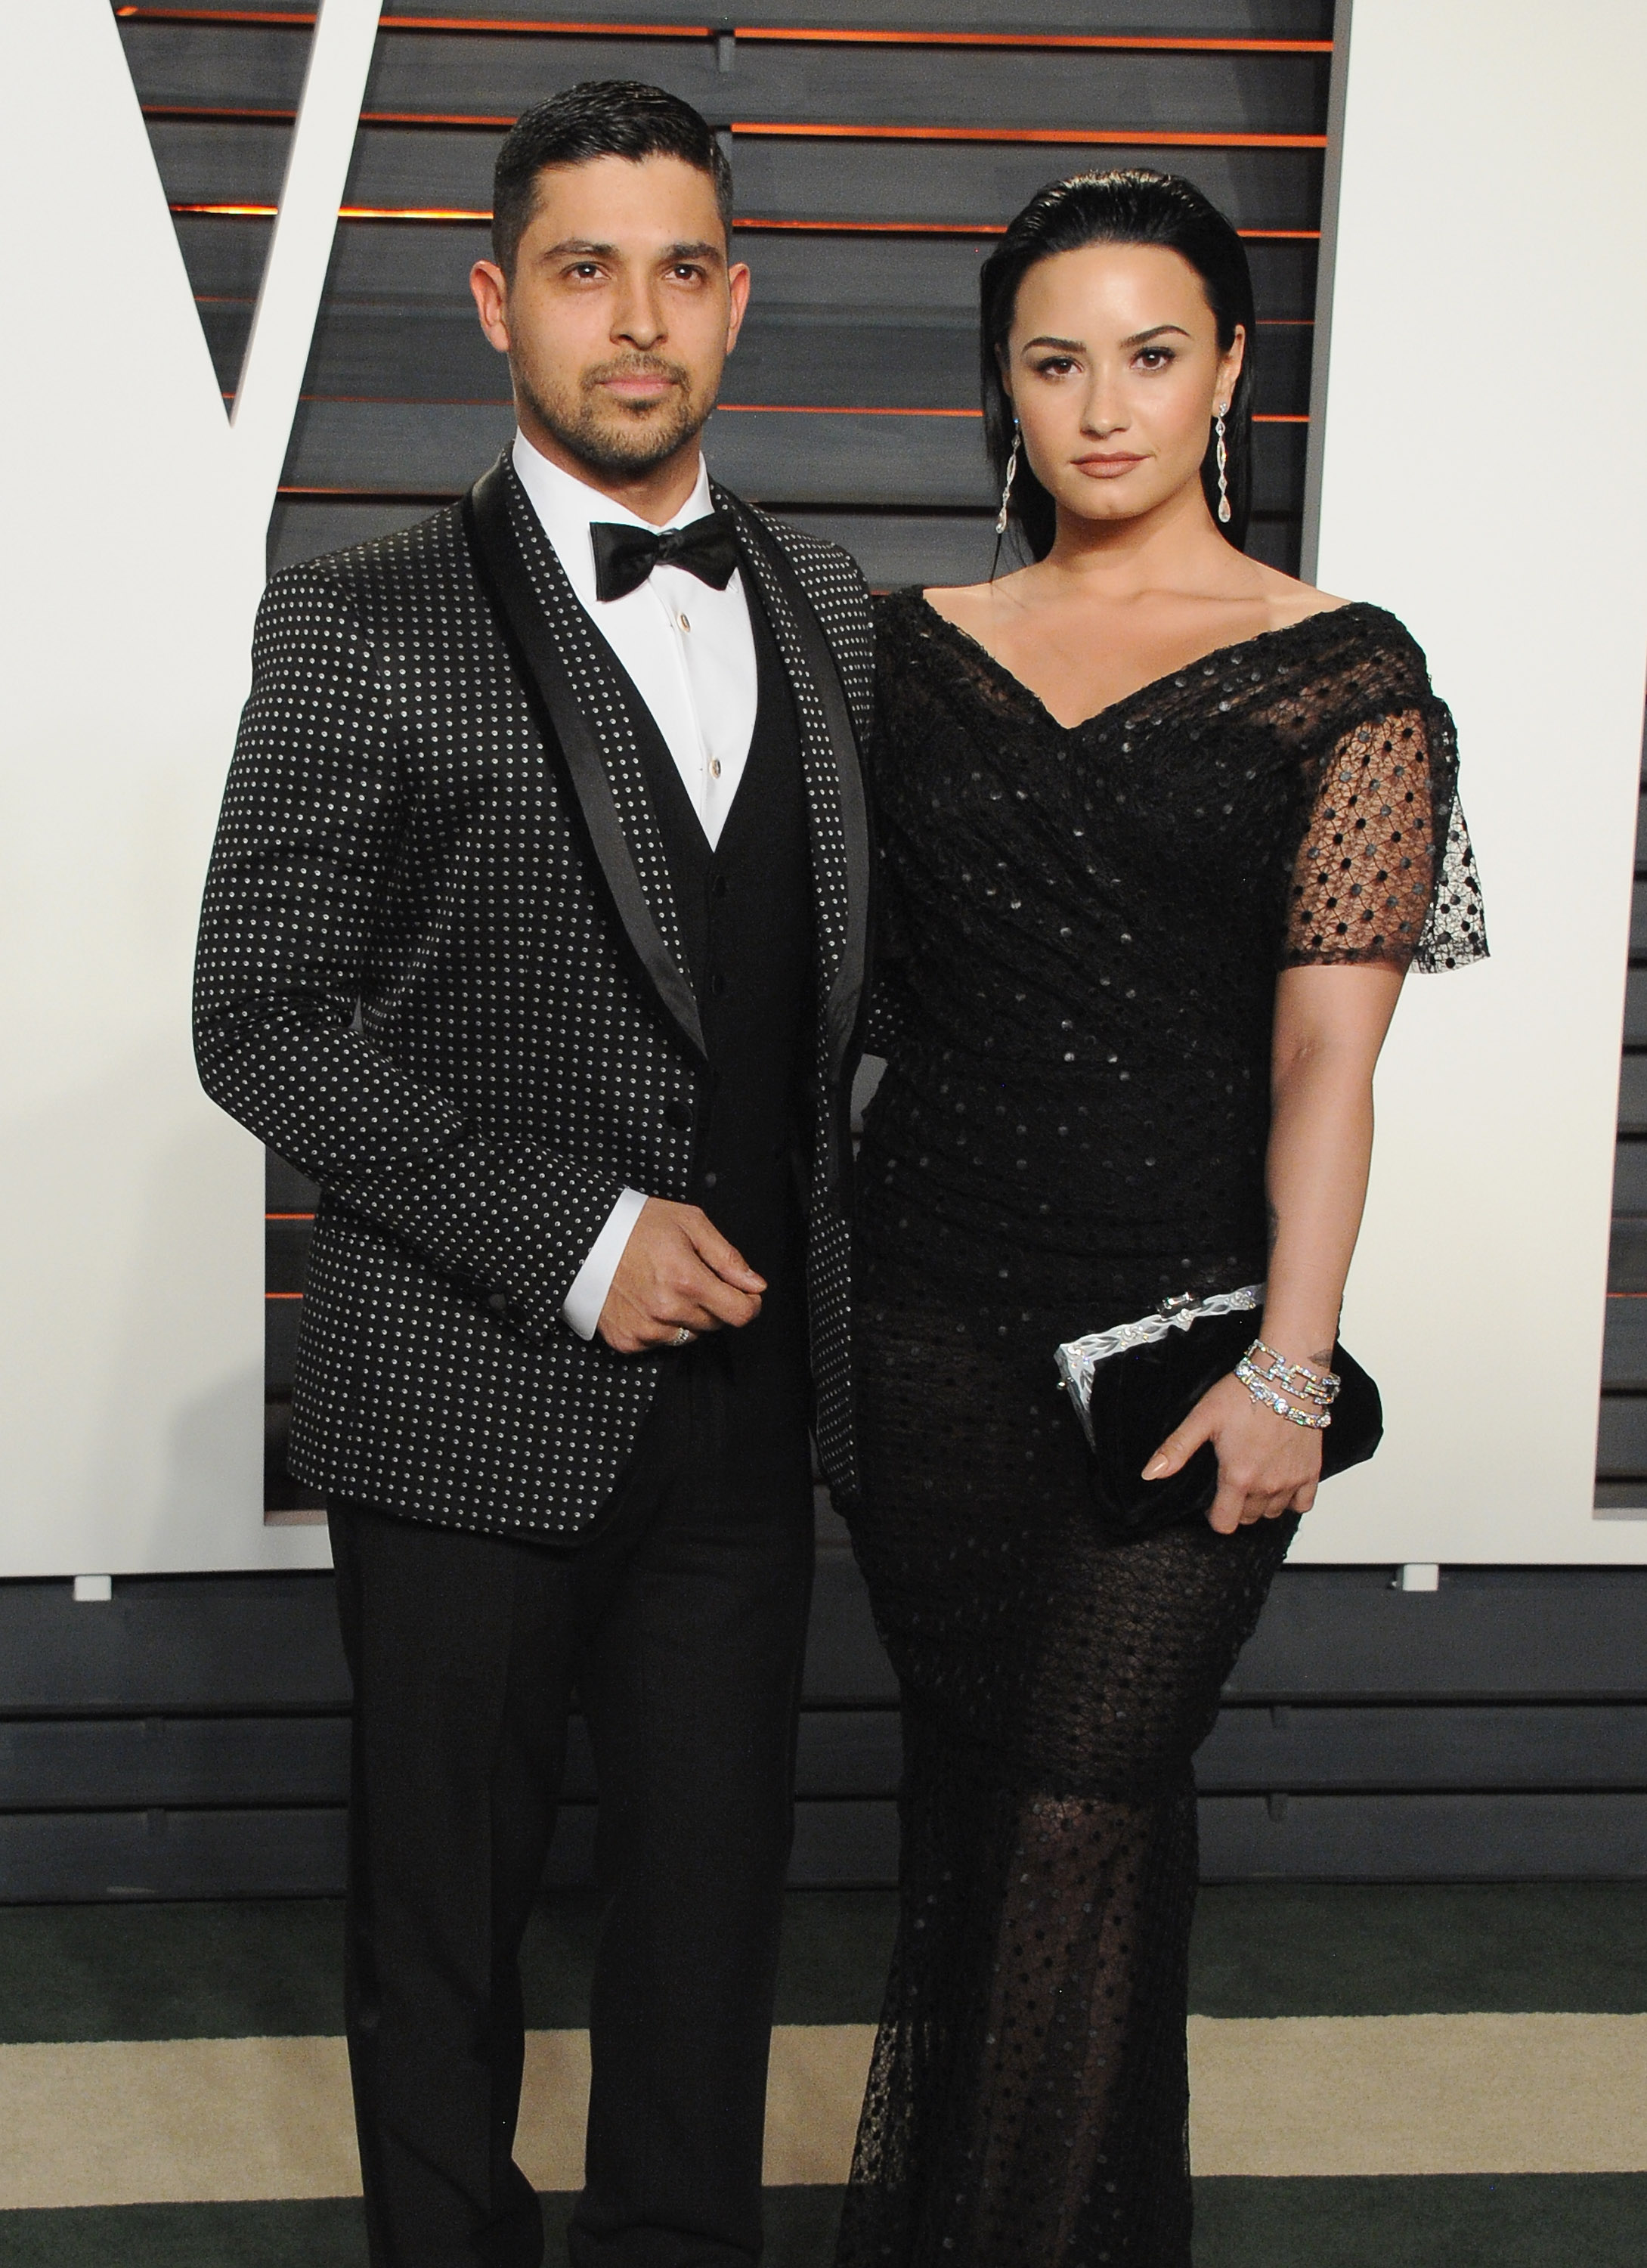 Demi Lovato and Wilmer Valderrama: Demi Lovato and Wilmer Valderrama called it quits in early June after nearly six years of dating; the pair announced their split via social media posts, stating that"we have realized more than anything that we are better as best friends. We will always be supportive of one another."